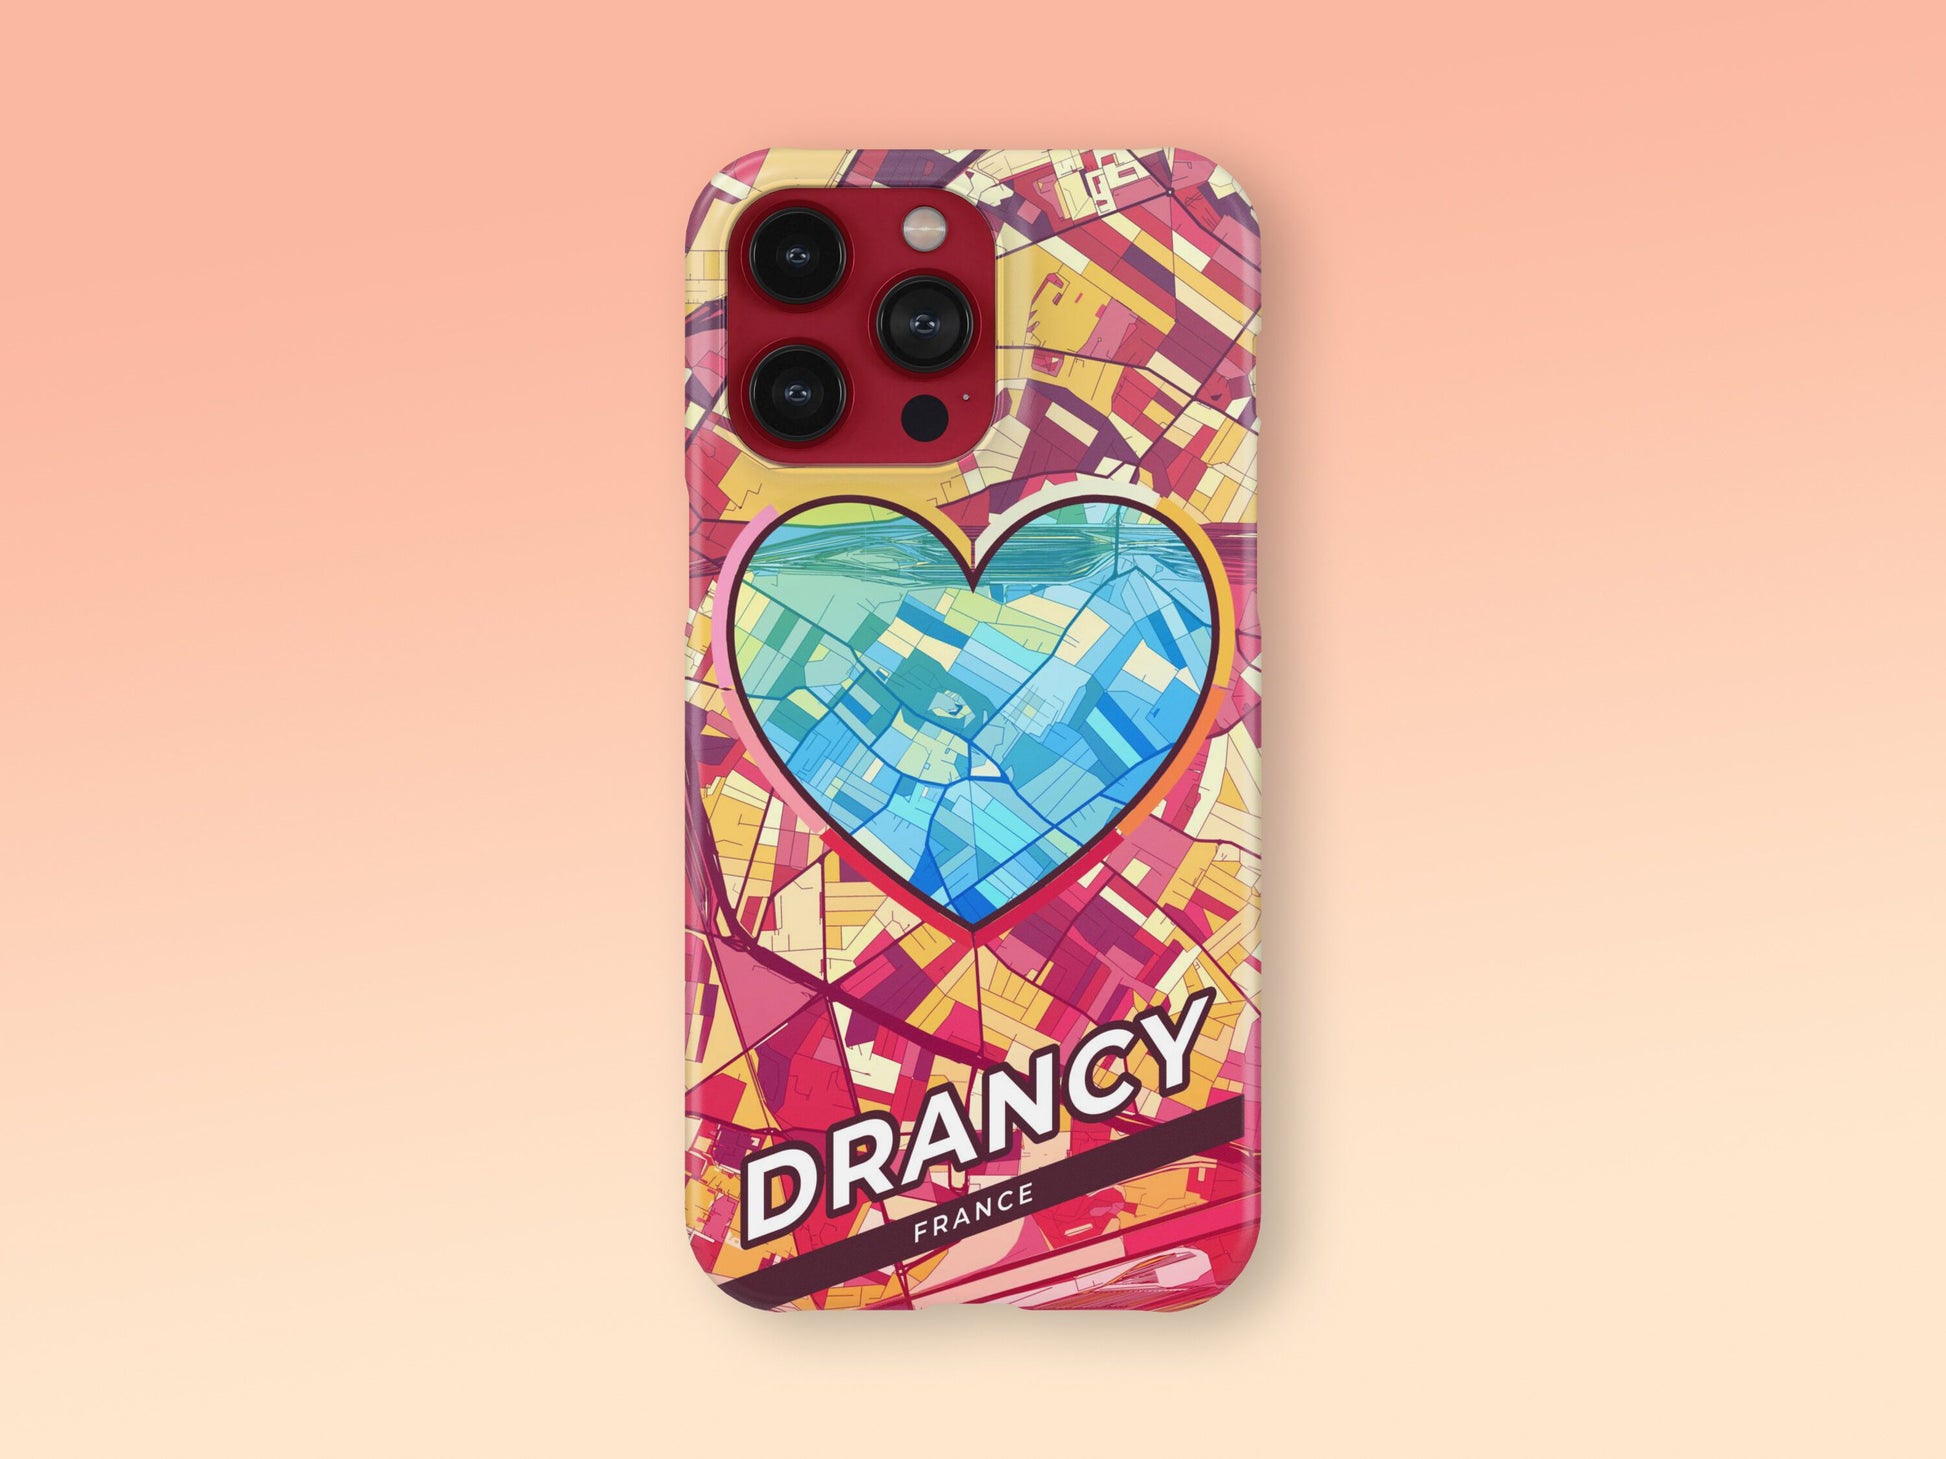 Drancy France slim phone case with colorful icon. Birthday, wedding or housewarming gift. Couple match cases. 2